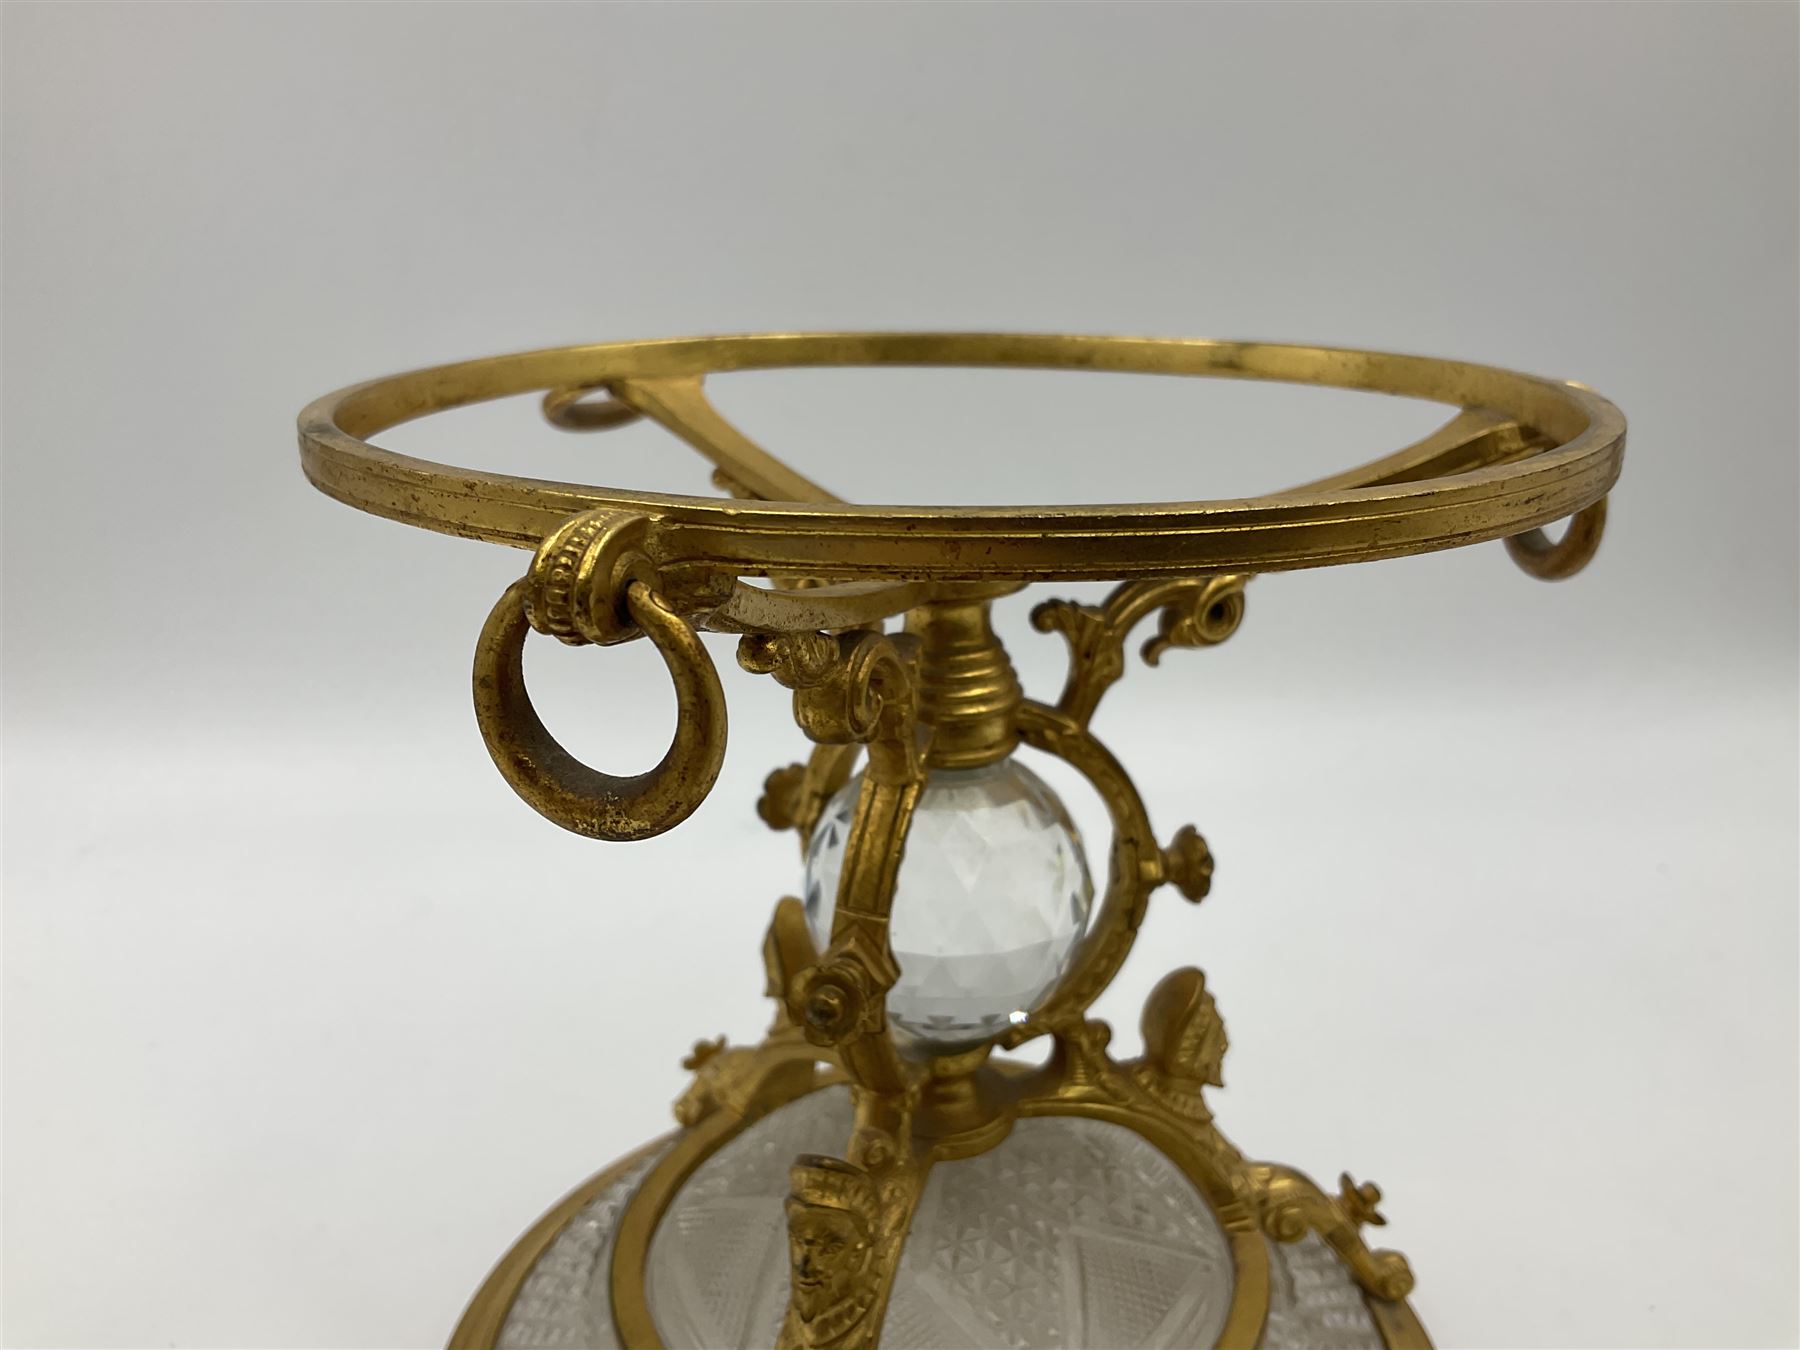 Pair of 19th century Osler glass and ormolu table centrepieces - Image 8 of 30